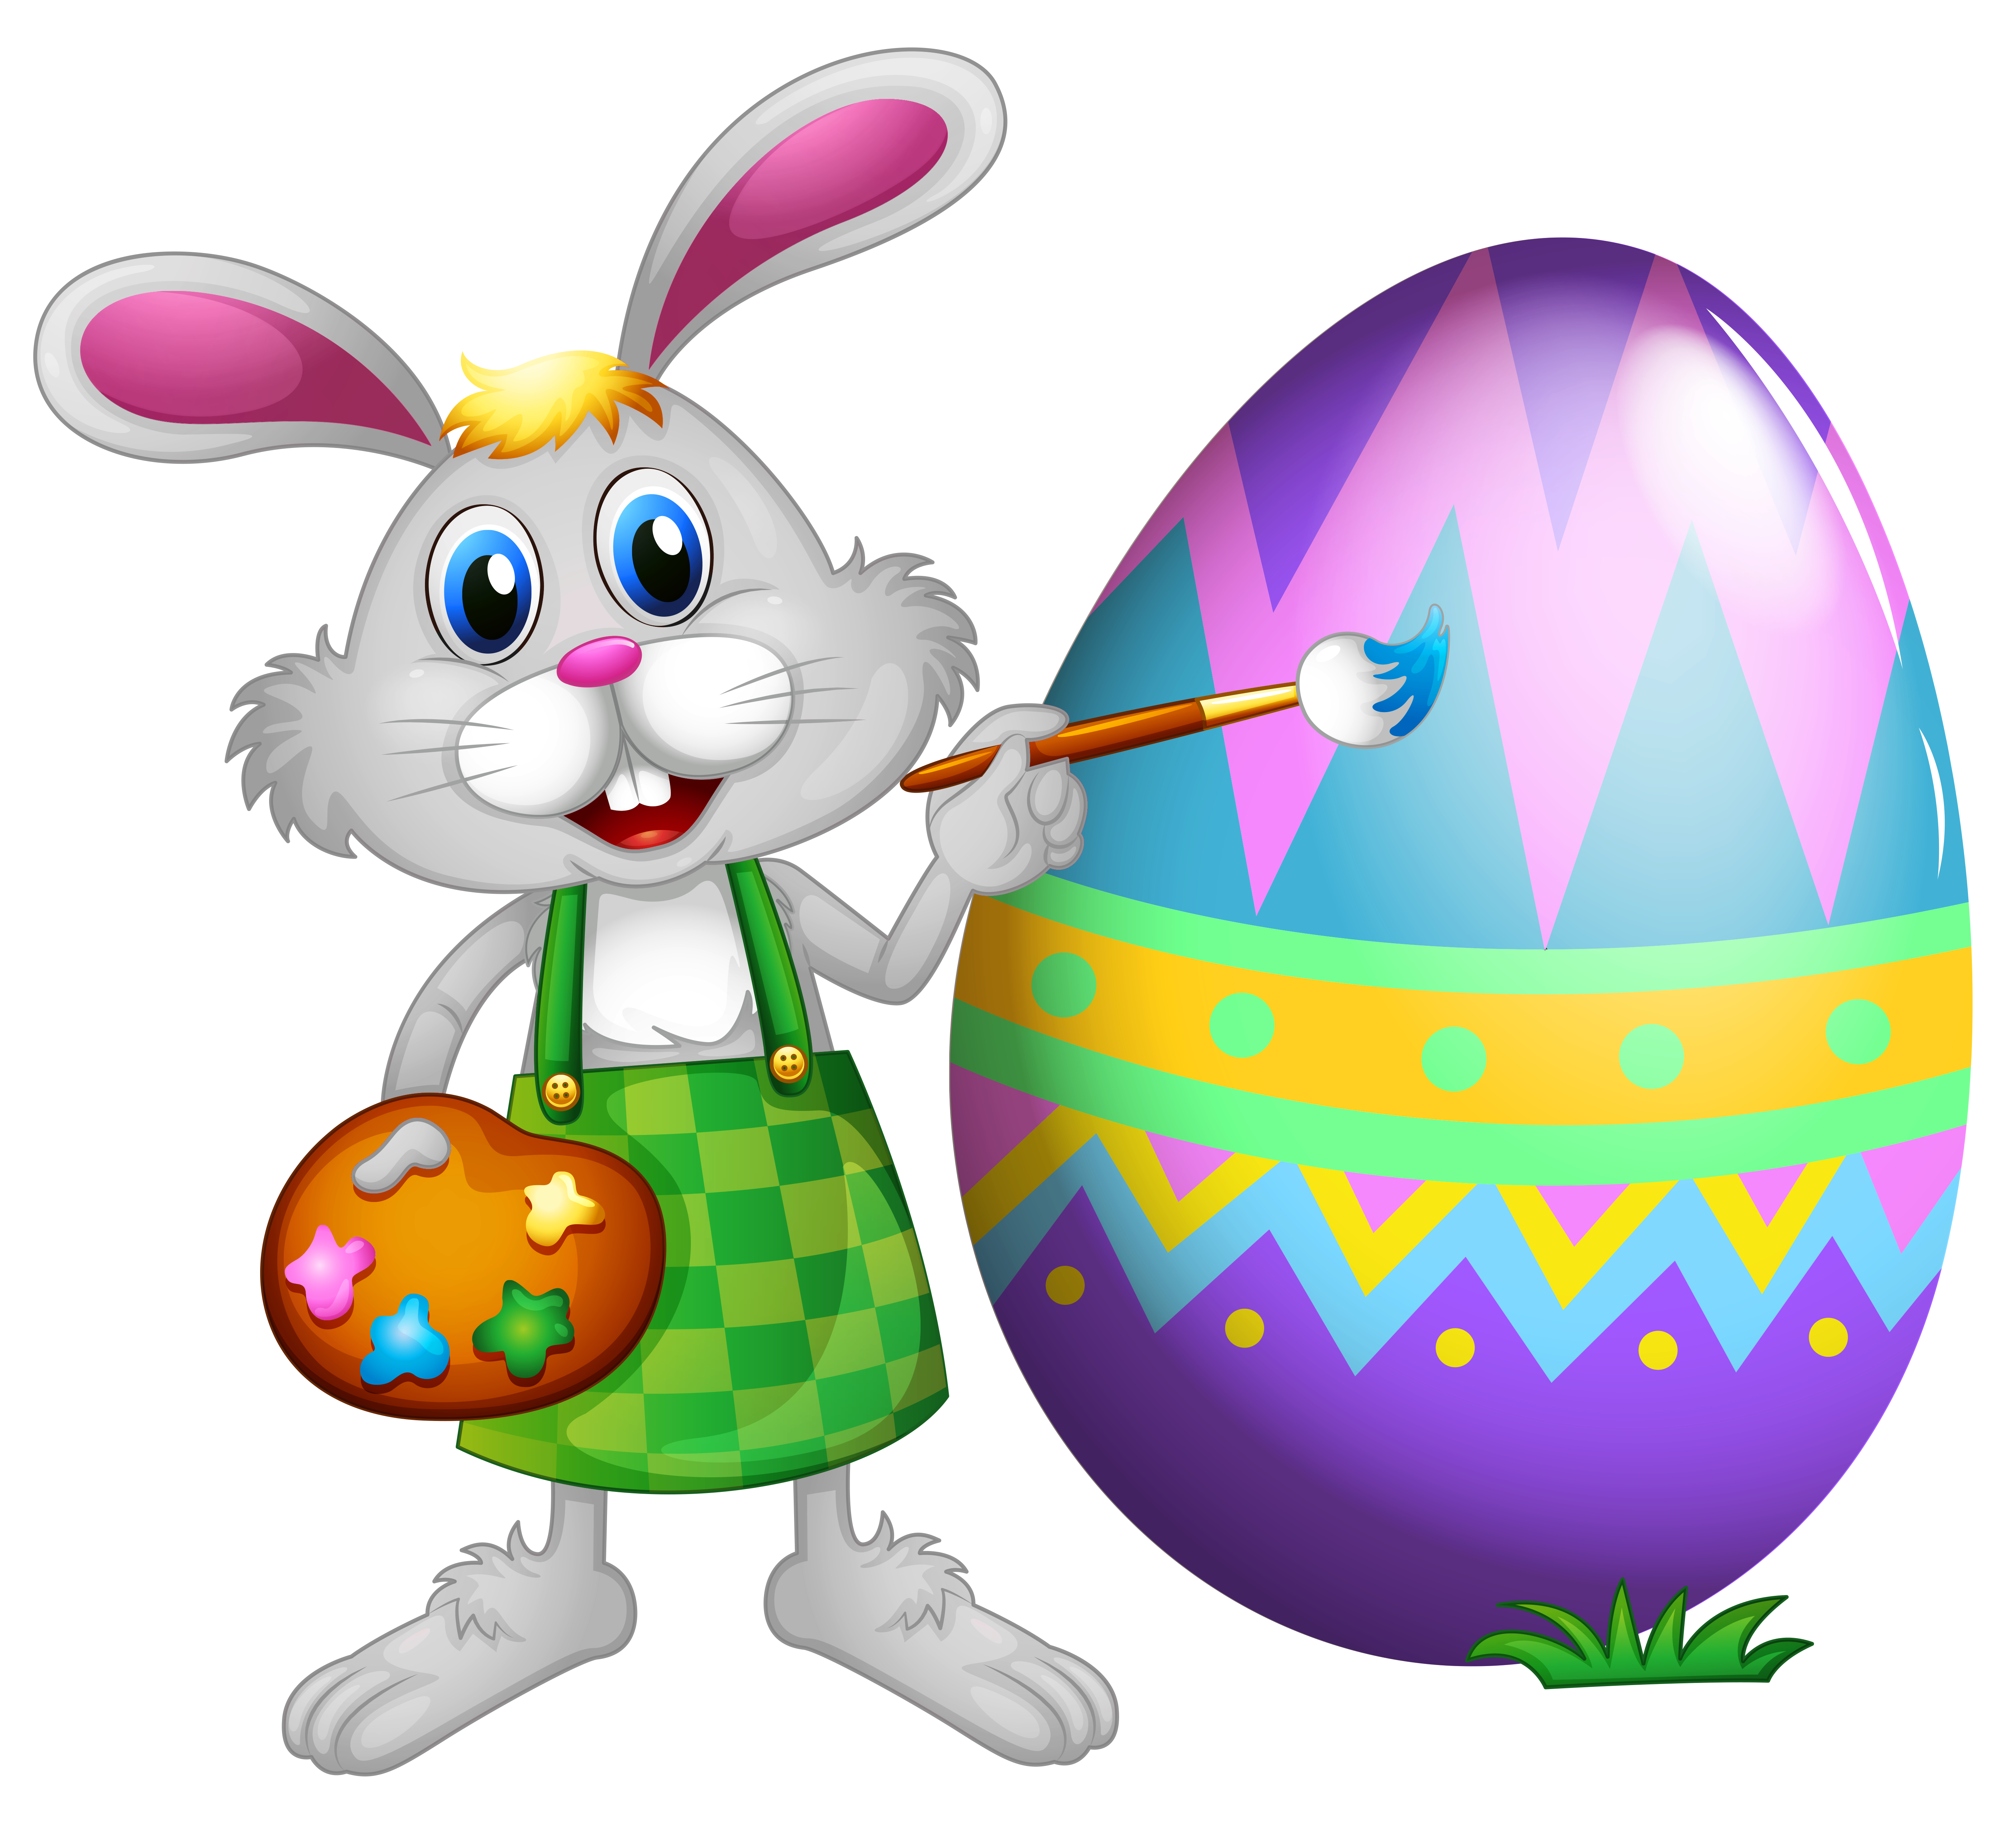 Clip Art Of Easter Bunny . - Free Easter Bunny Clipart